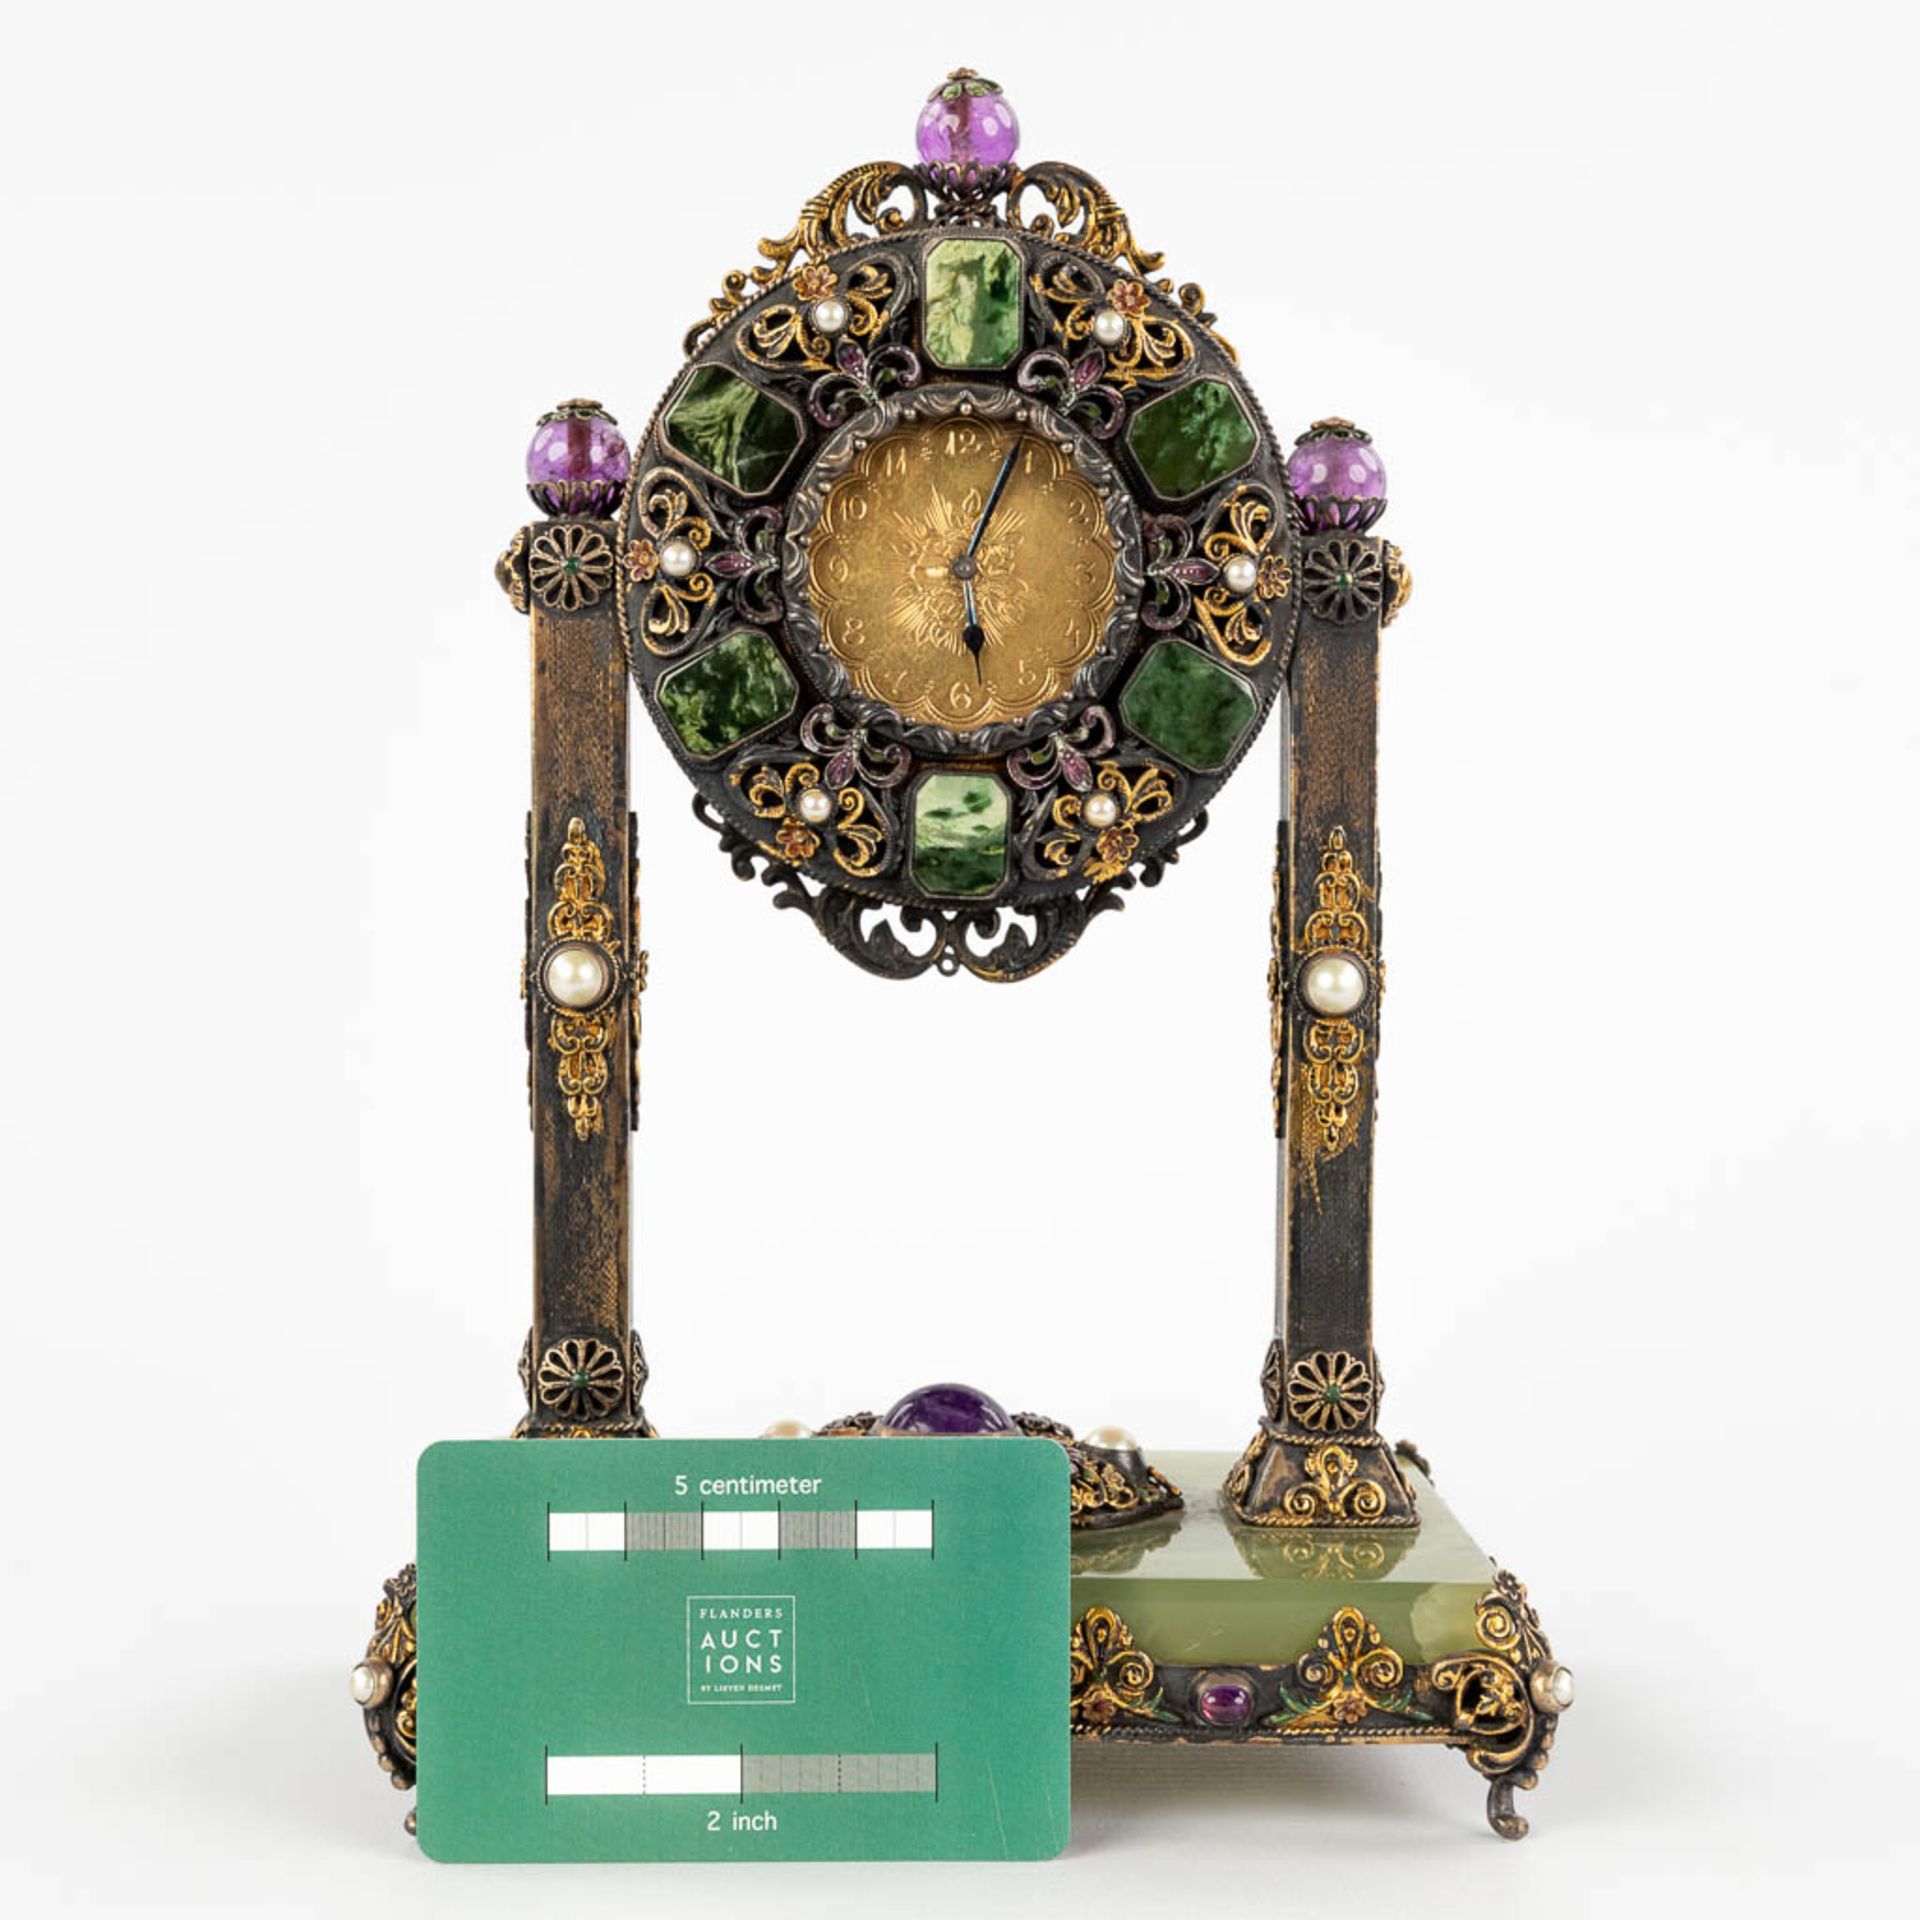 A mantle clock, silver and gold-plated metal and decorated with stone and onyx, pearls. Circa 1900. - Image 2 of 14